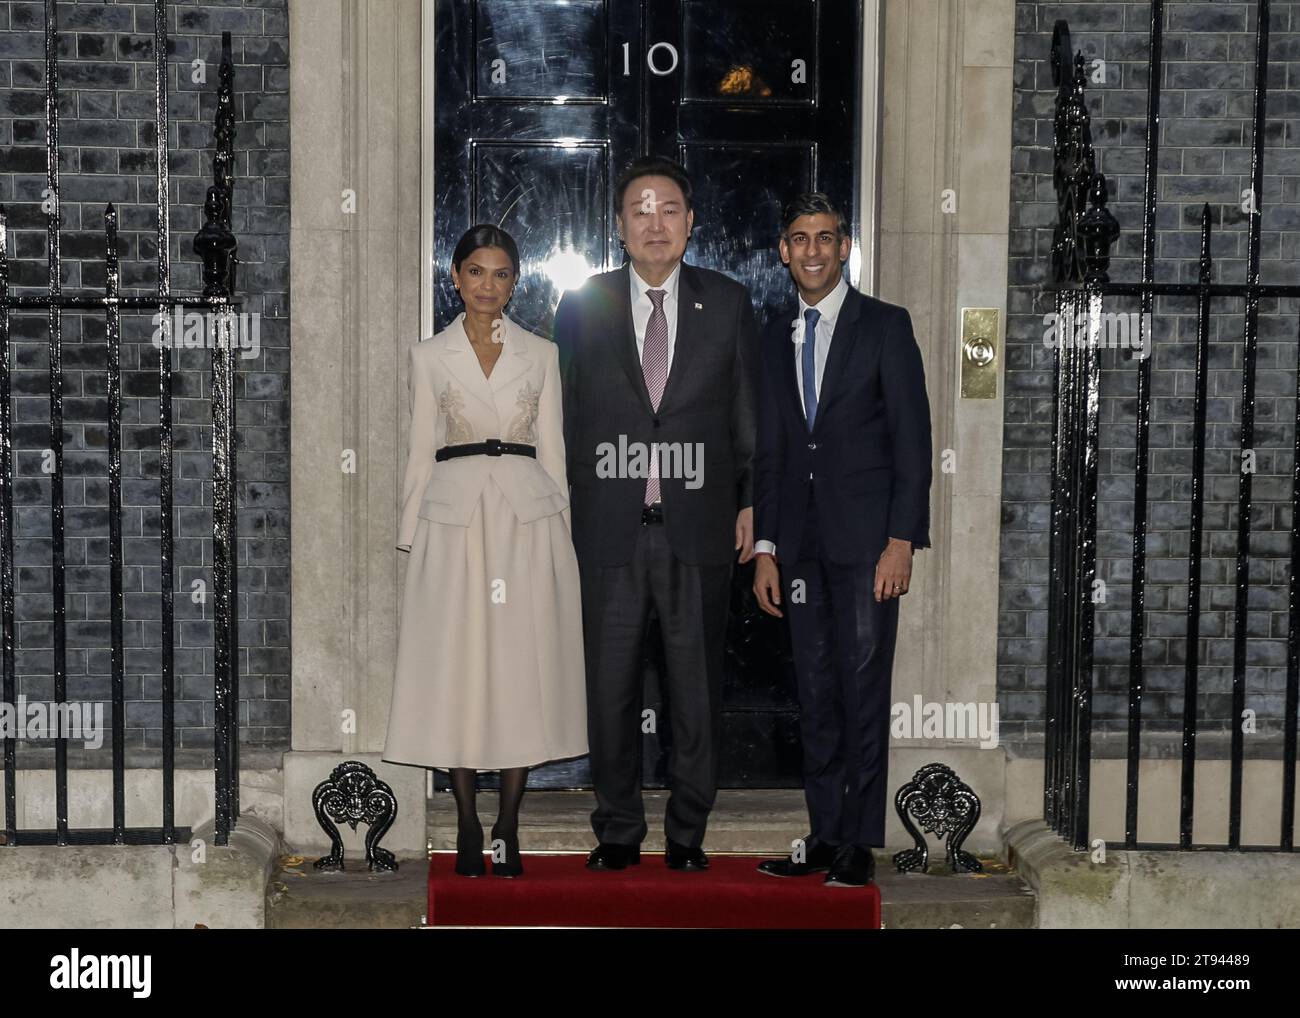 London, UK. 22nd Nov, 2023. Rishi Sunak, British Prime Minister, together with his wife Akshata Murty, welcomes the President of the Republic of Korea, His Excellency Yoon Suk Yeol, to 10 Downing Street as part of their State Visit to the UK. Credit: Imageplotter/Alamy Live News Stock Photo